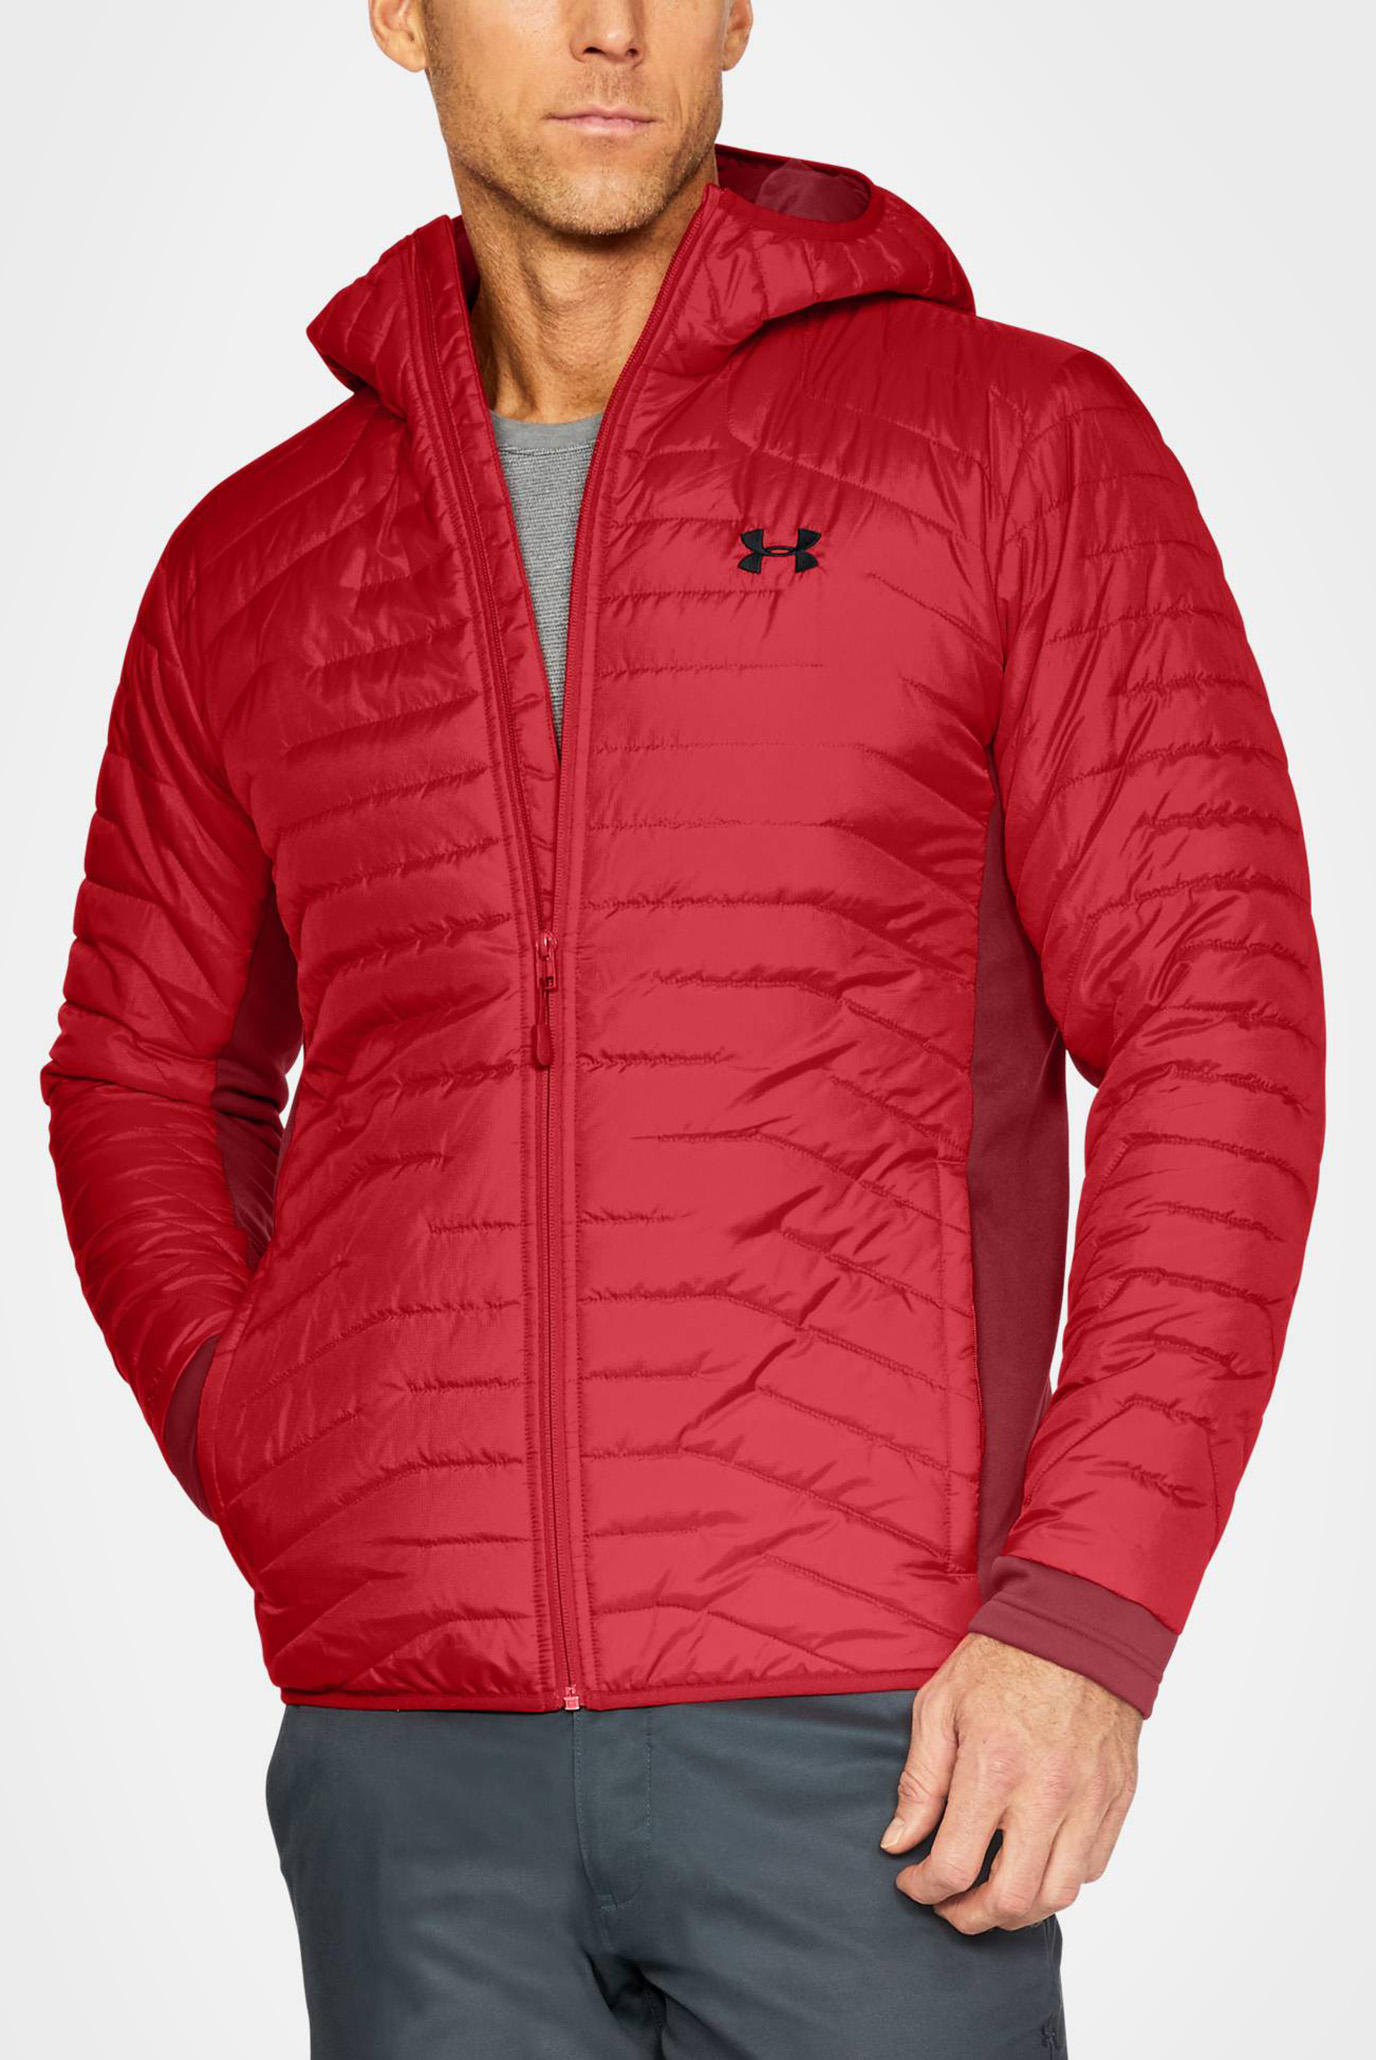 under armour 1303060 jacket snrc99